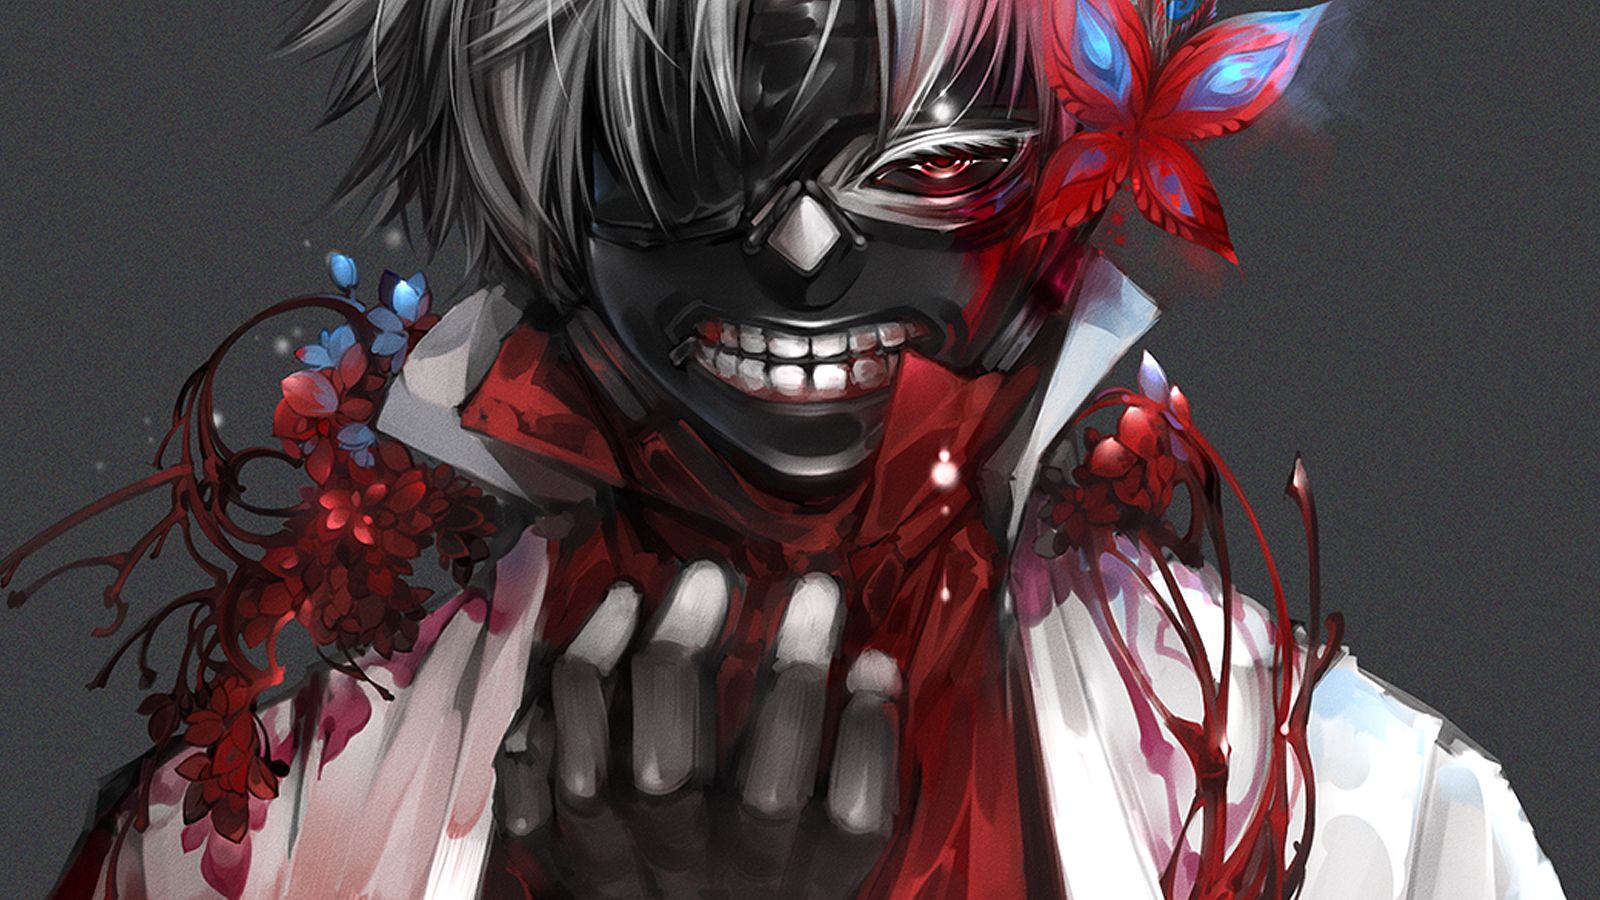 Download wallpaper from anime Tokyo Ghoul with tags: Macbook, Ken